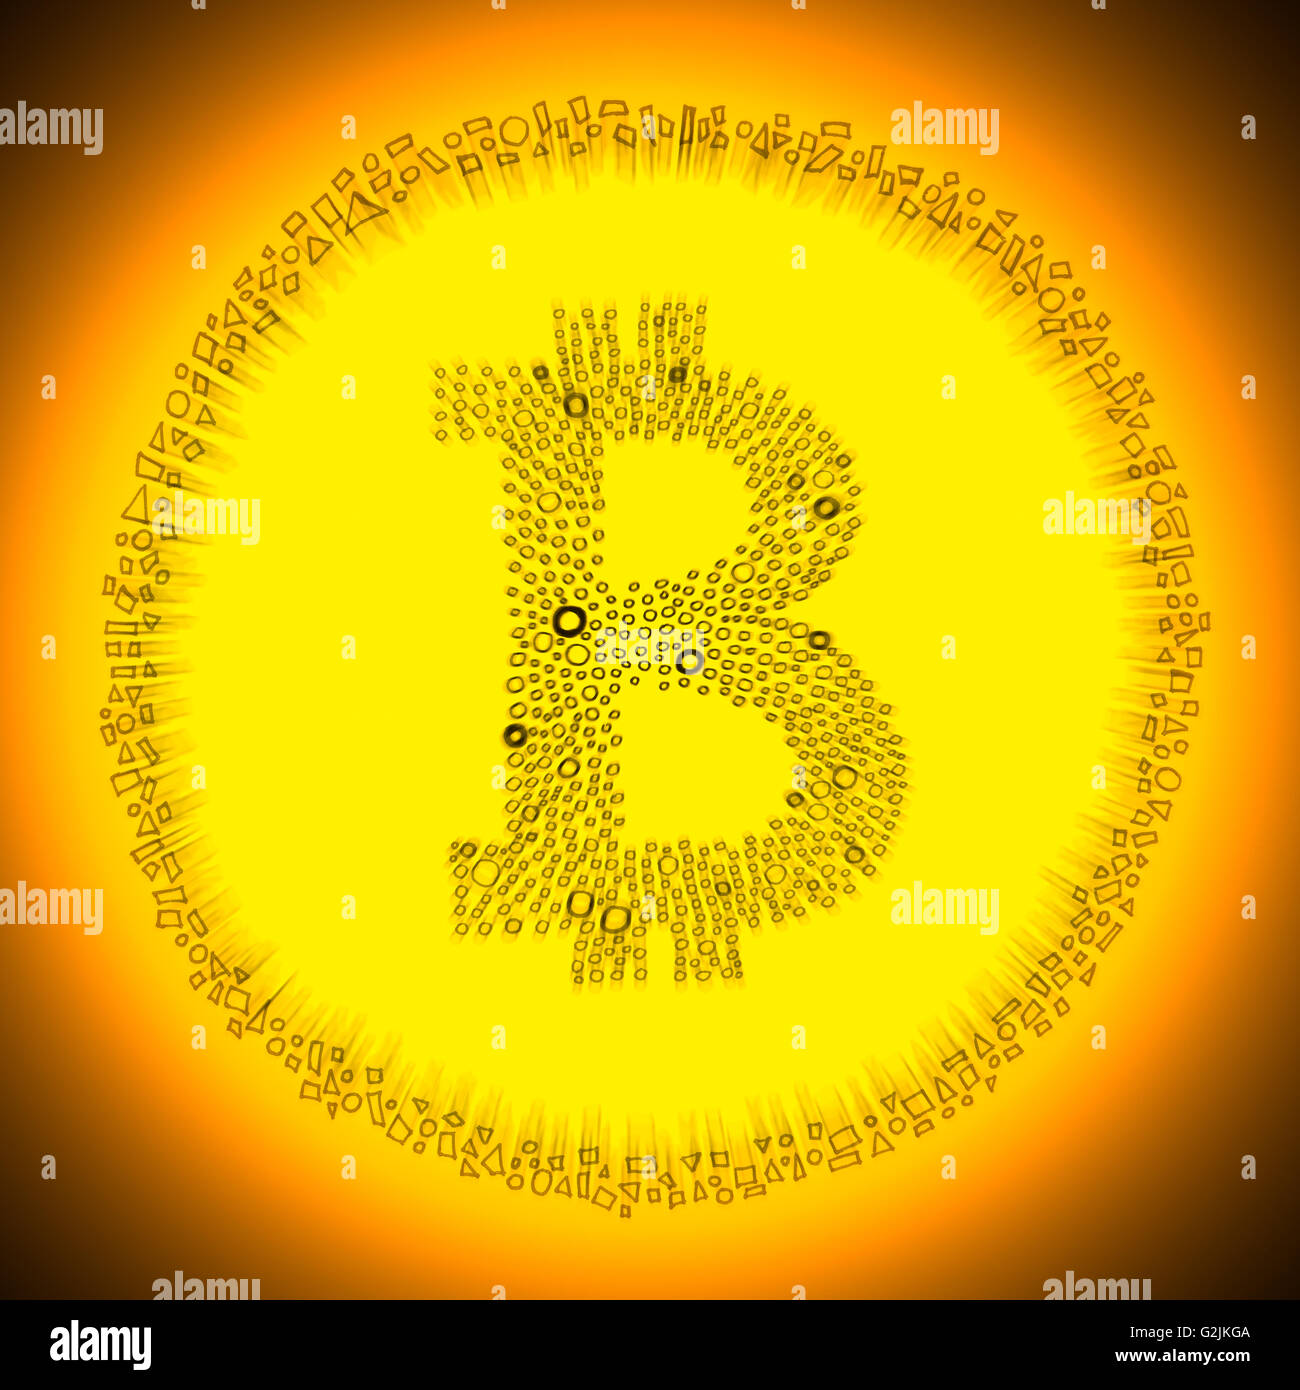 Golden Bitcoin symbol. Illustration of a digital decentralized crypto currency coin. Stock Photo